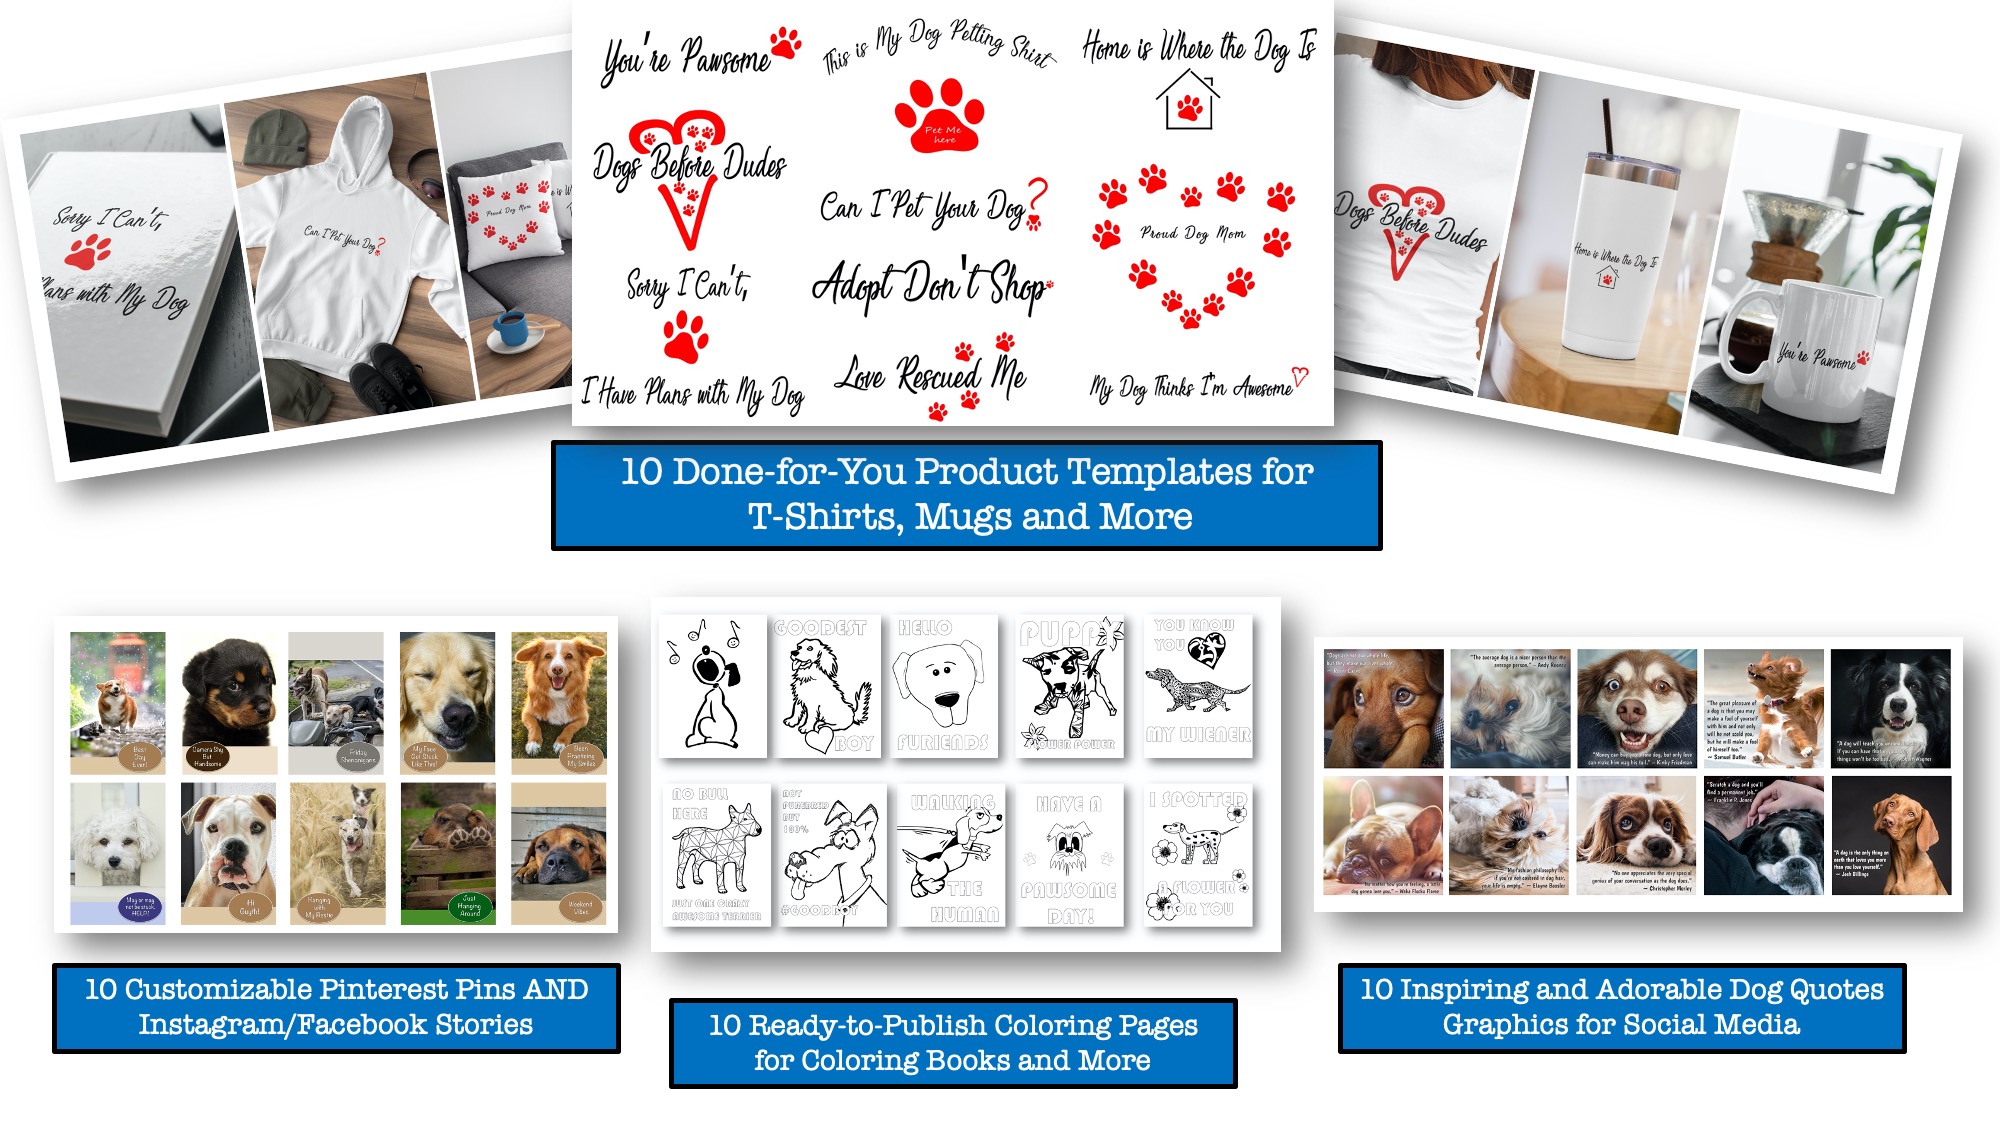 Dog Niche Product and Social Media Templates